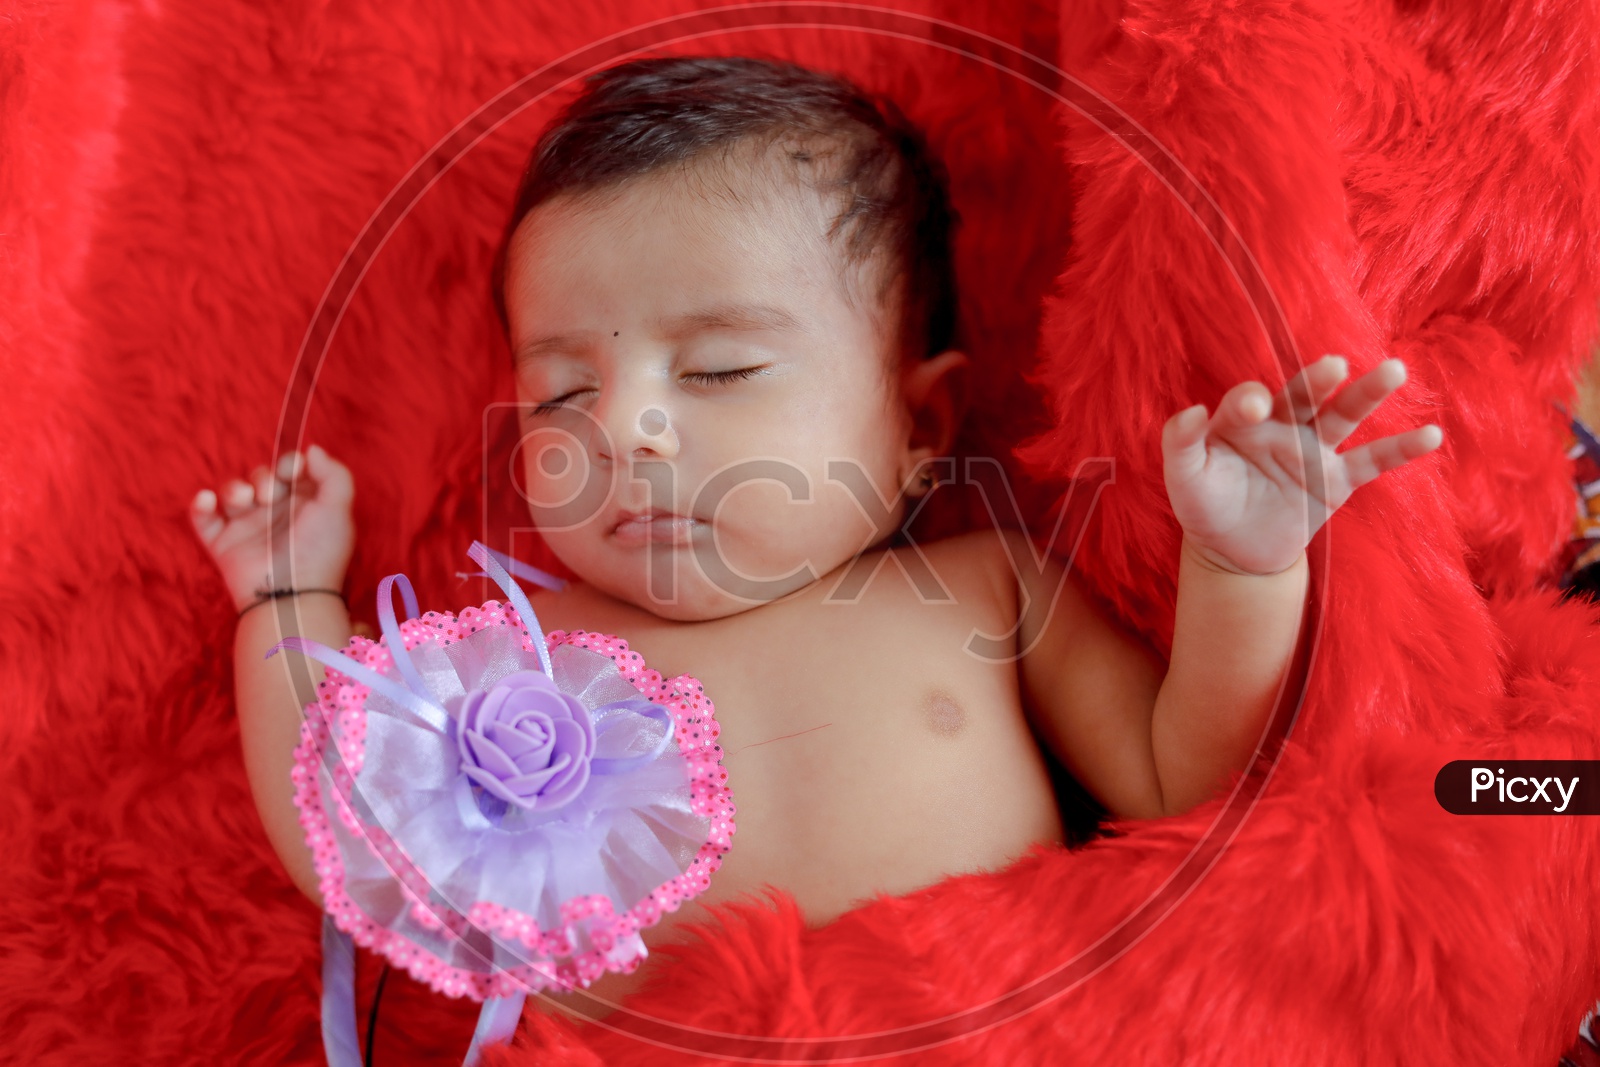 Indian Cute Baby Sleeping With A Cute  Expression on Face Closeup Shot